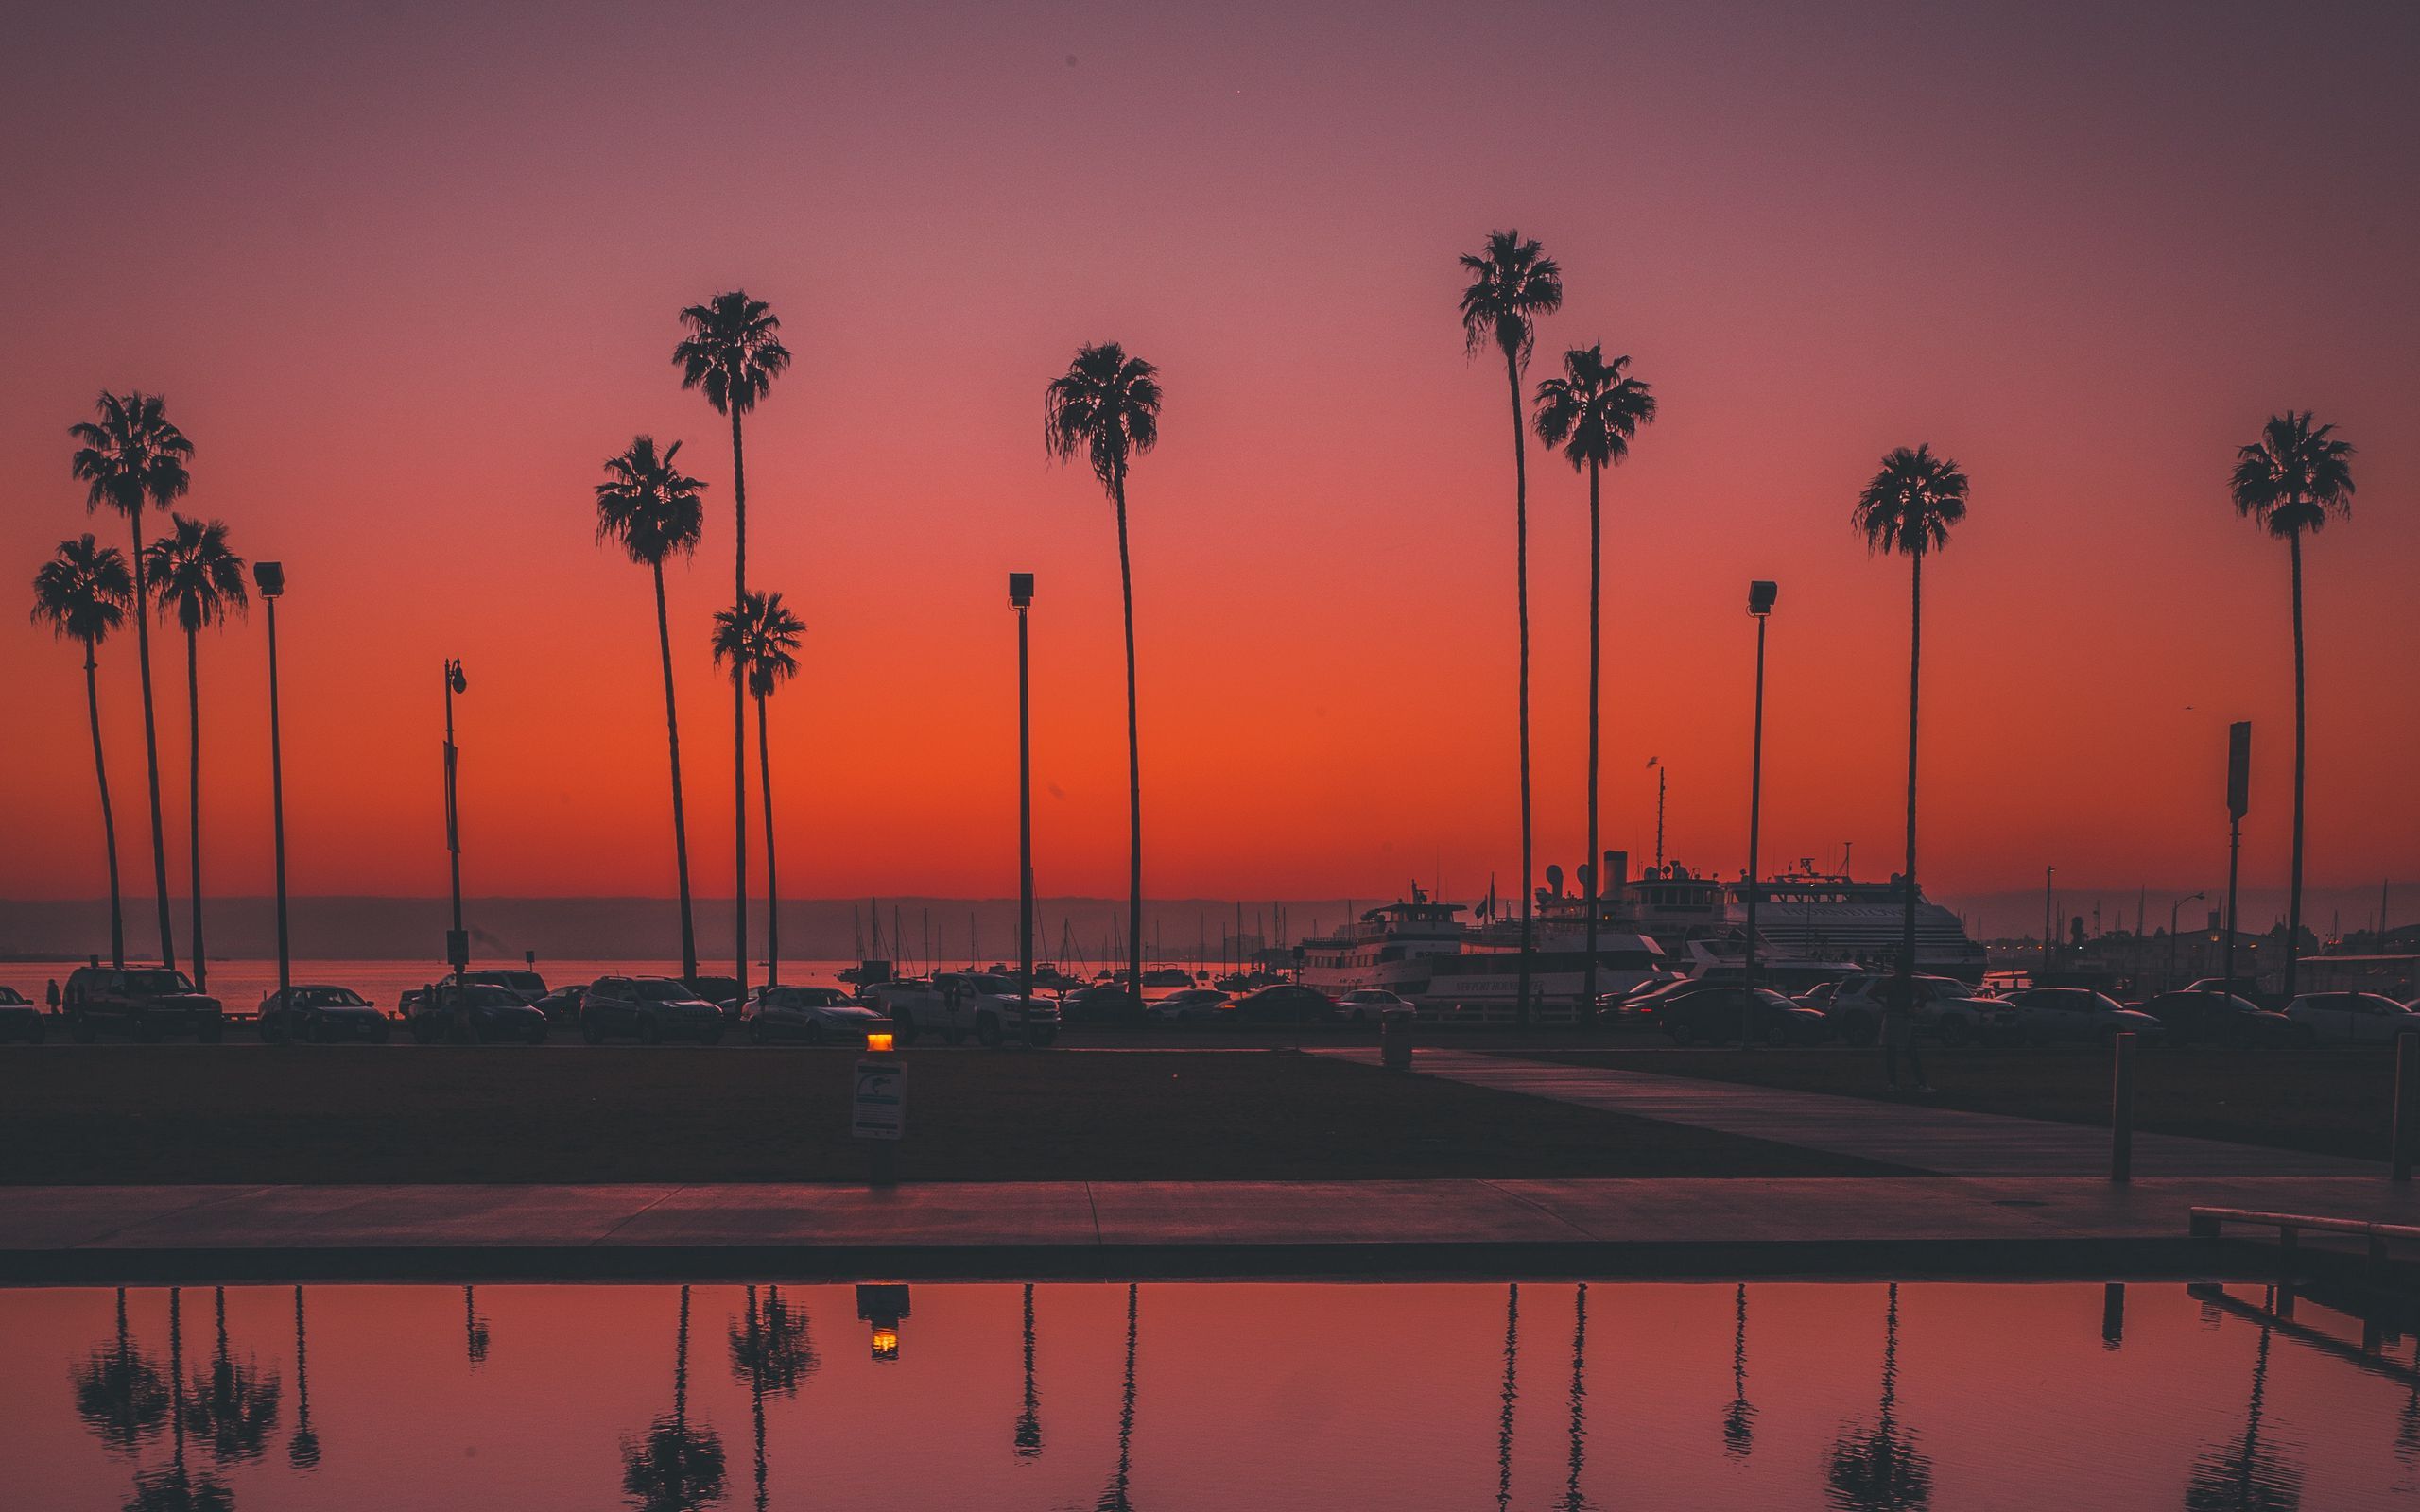 Download wallpaper 2560x1600 palms, sunset, san diego, usa, reflection widescreen 16:10 HD background - 2560x1600